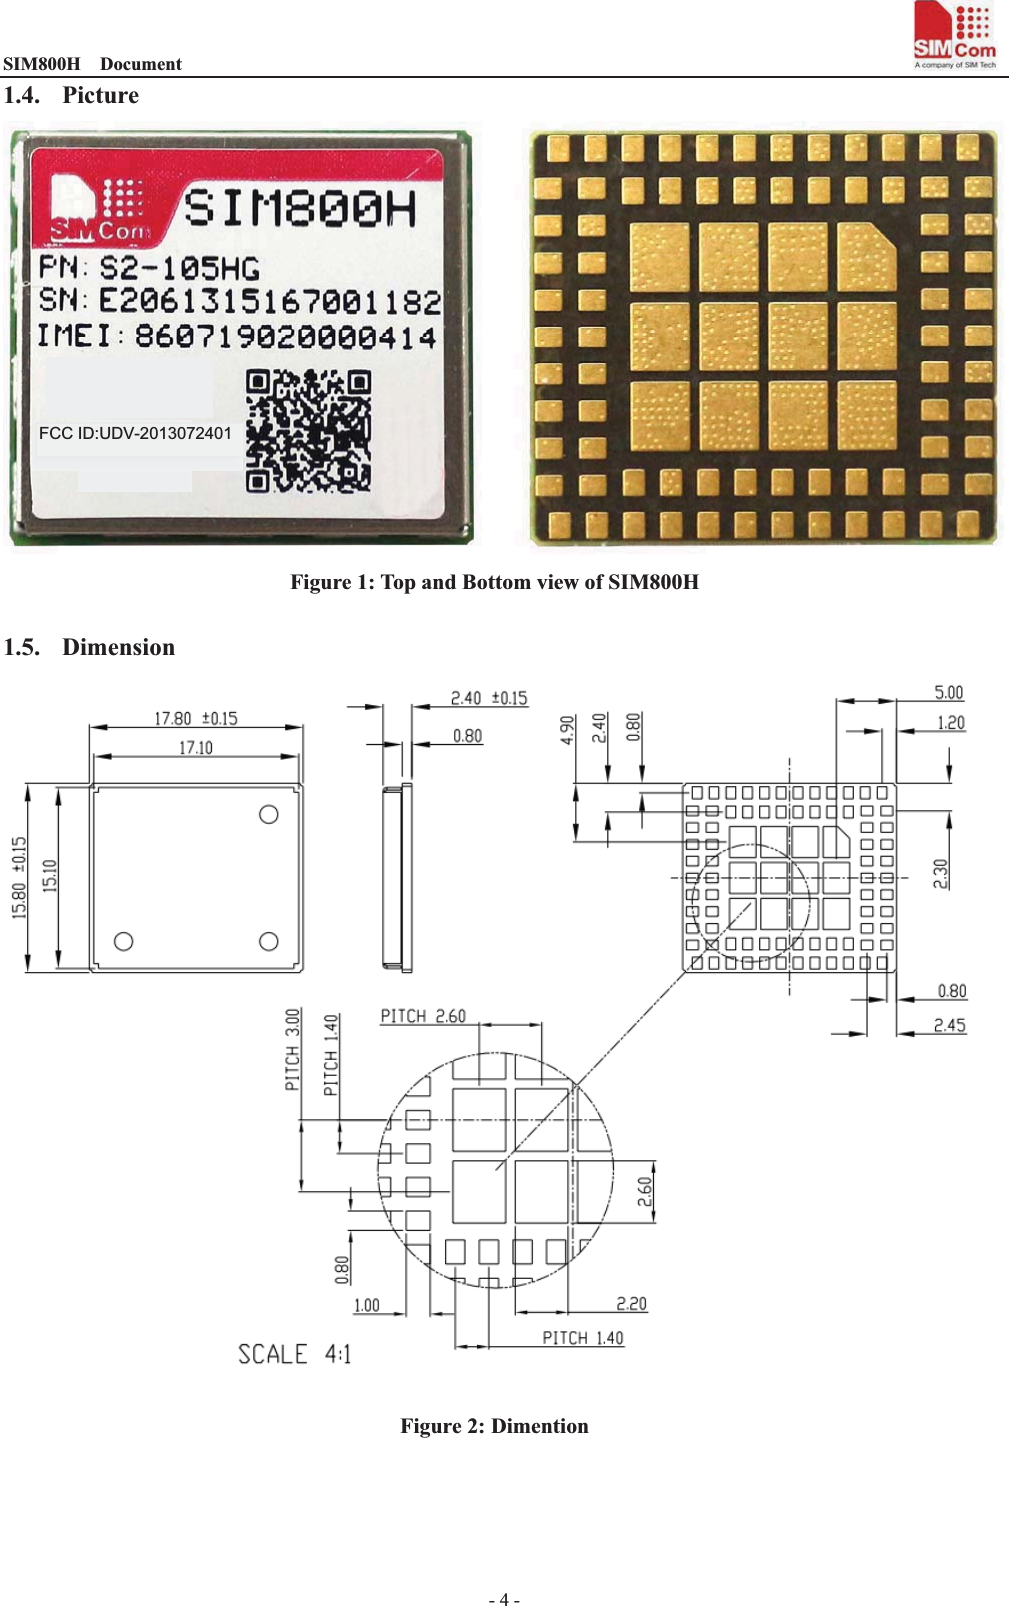 SIM800H  Document                                                                                - 4 - 1.4. Picture  Figure 1: Top and Bottom view of SIM800H  1.5. Dimension Figure 2: Dimention  FCC ID:2013-072401FCC ID:UDV-2013072401